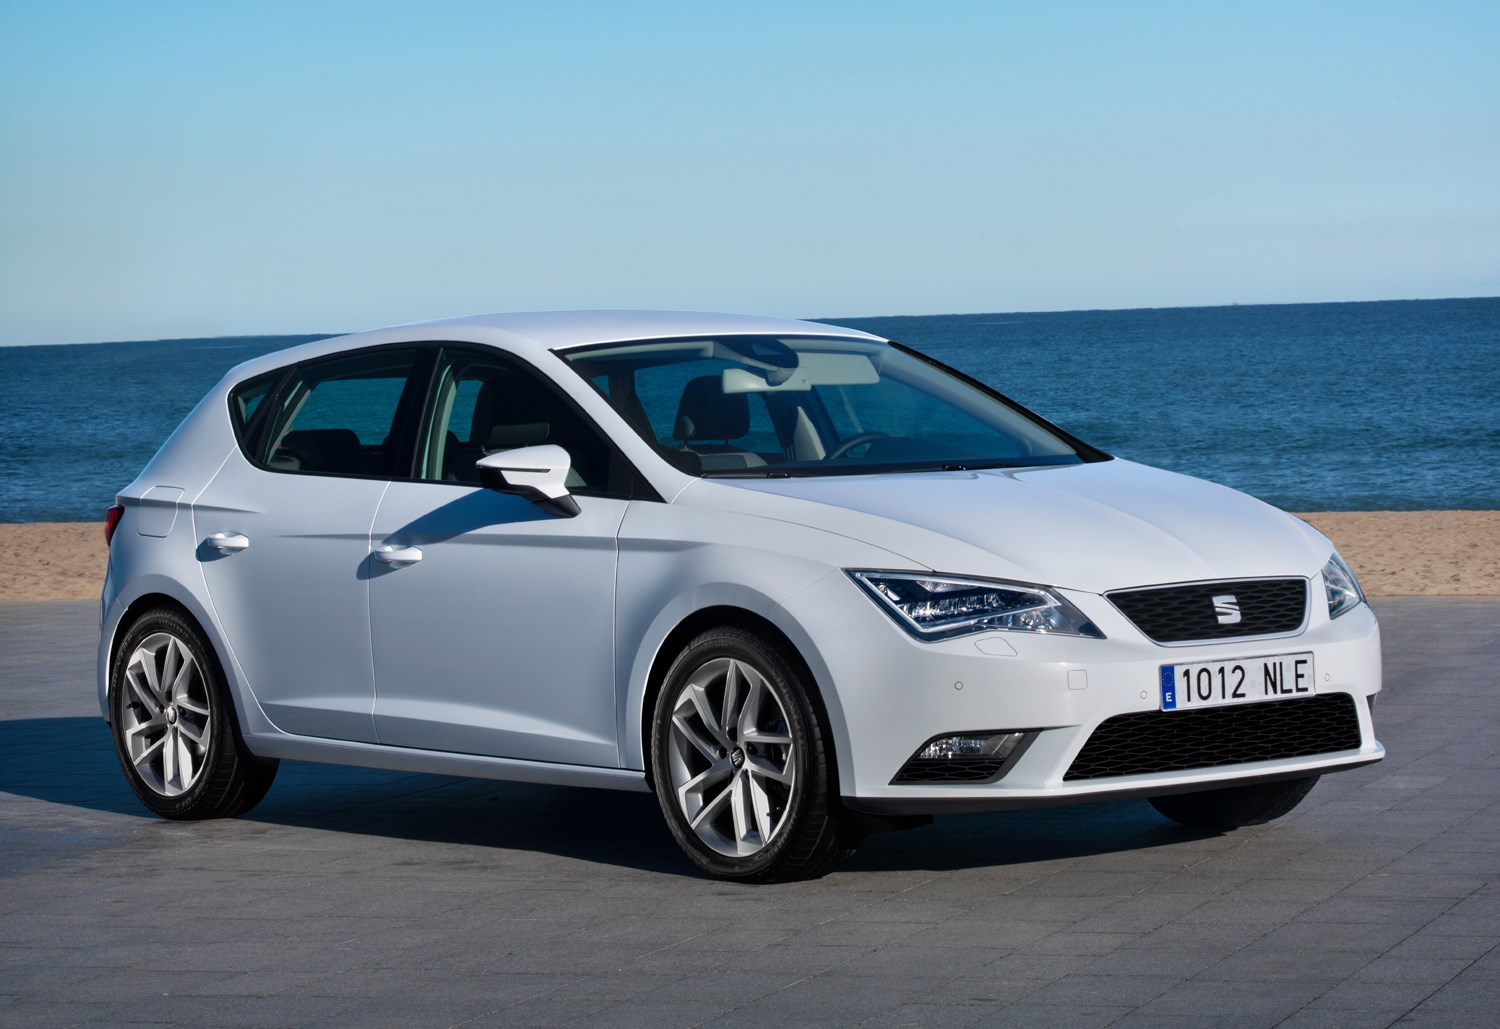 HQ Seat Leon Wallpapers | File 216.17Kb